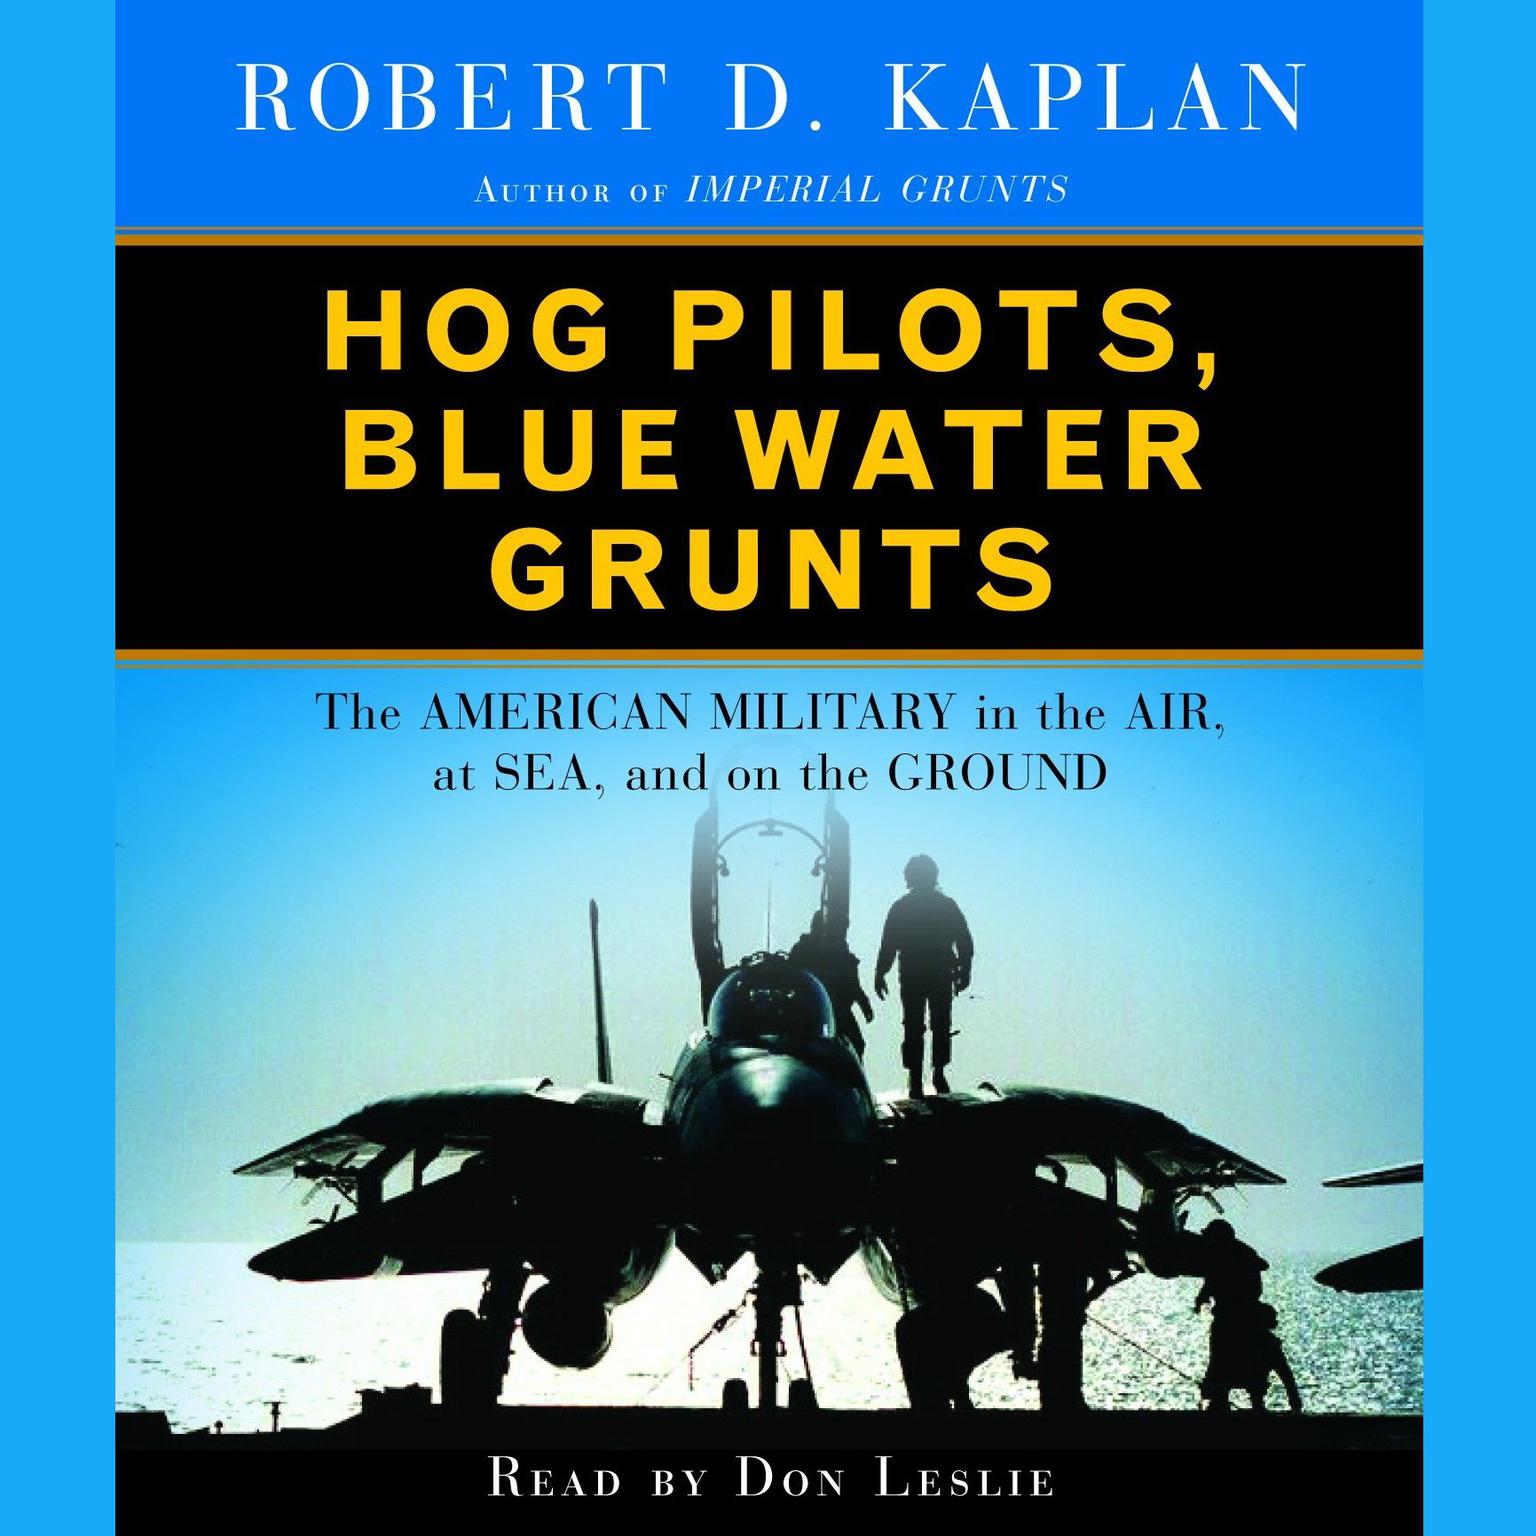 Hog Pilots, Blue Water Grunts (Abridged): The American Military in the Air, at Sea, and on the Ground Audiobook, by Robert D. Kaplan